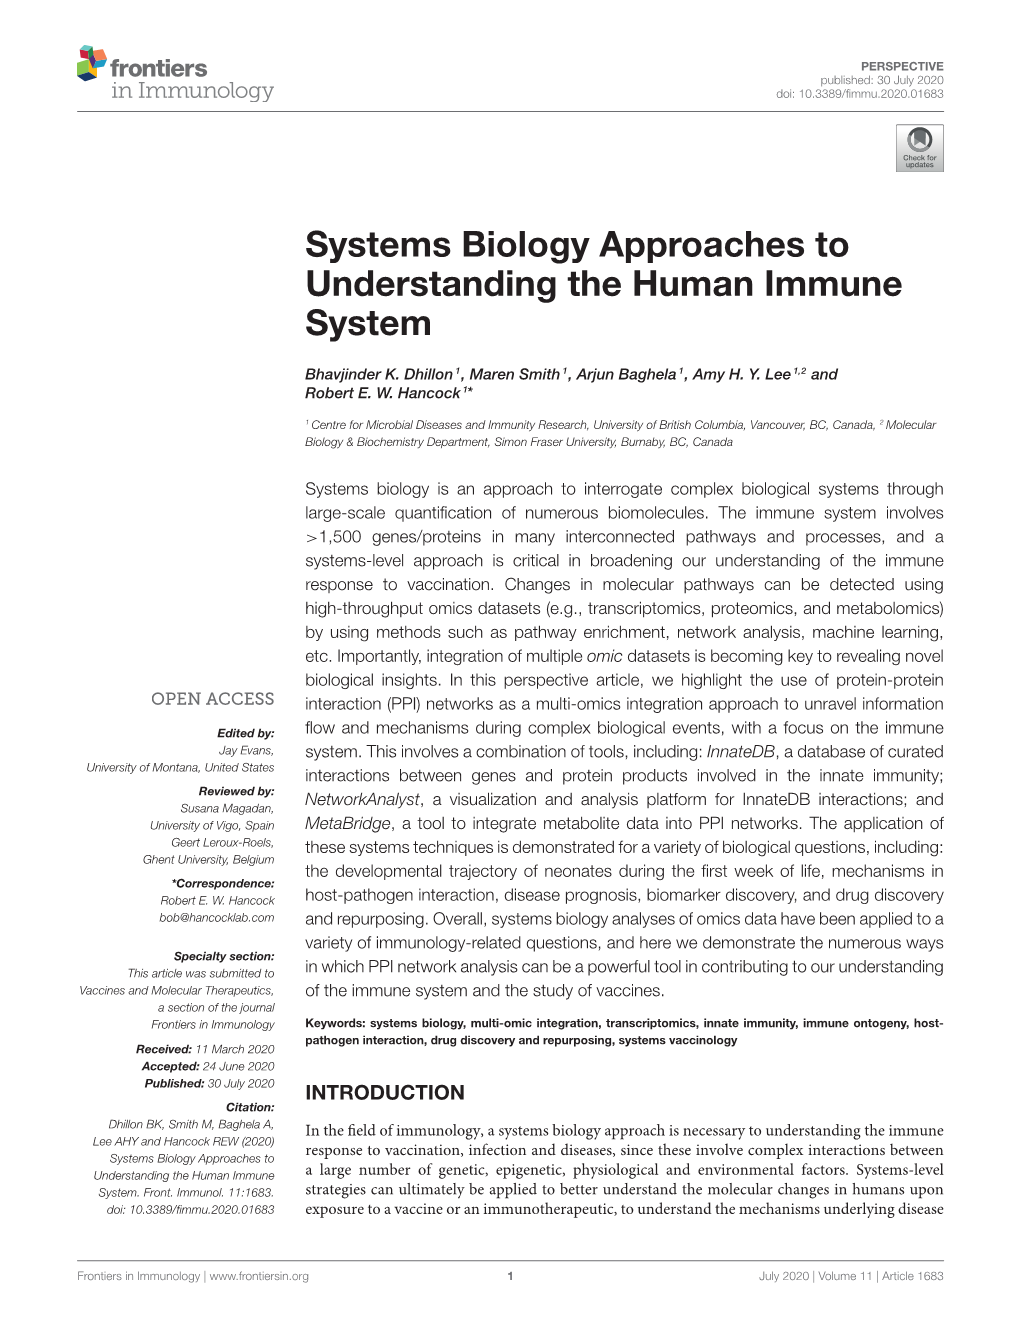 Systems Biology Approaches to Understanding the Human Immune System